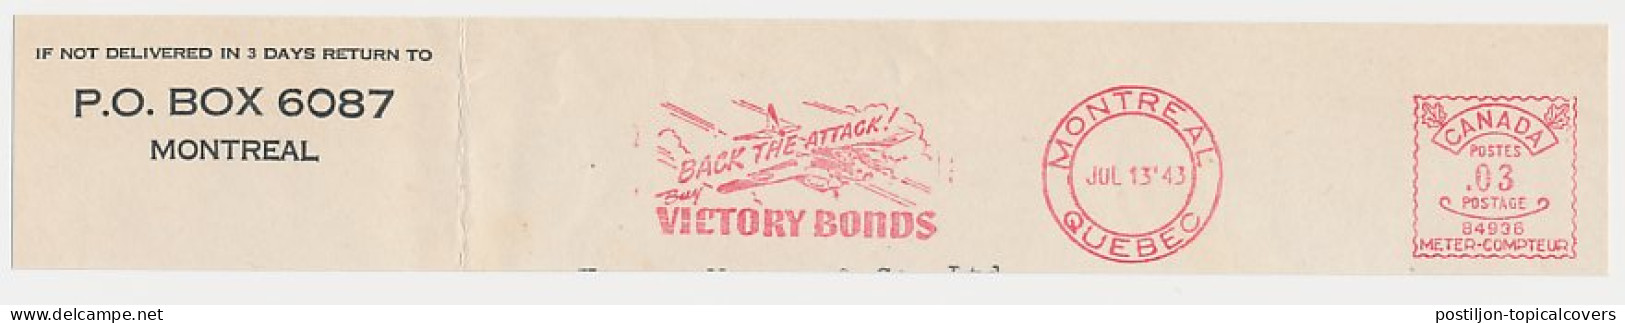 Meter Top Cut Canada 1943 Jet Fighter - Back The Attack - Victory Bonds - WO2